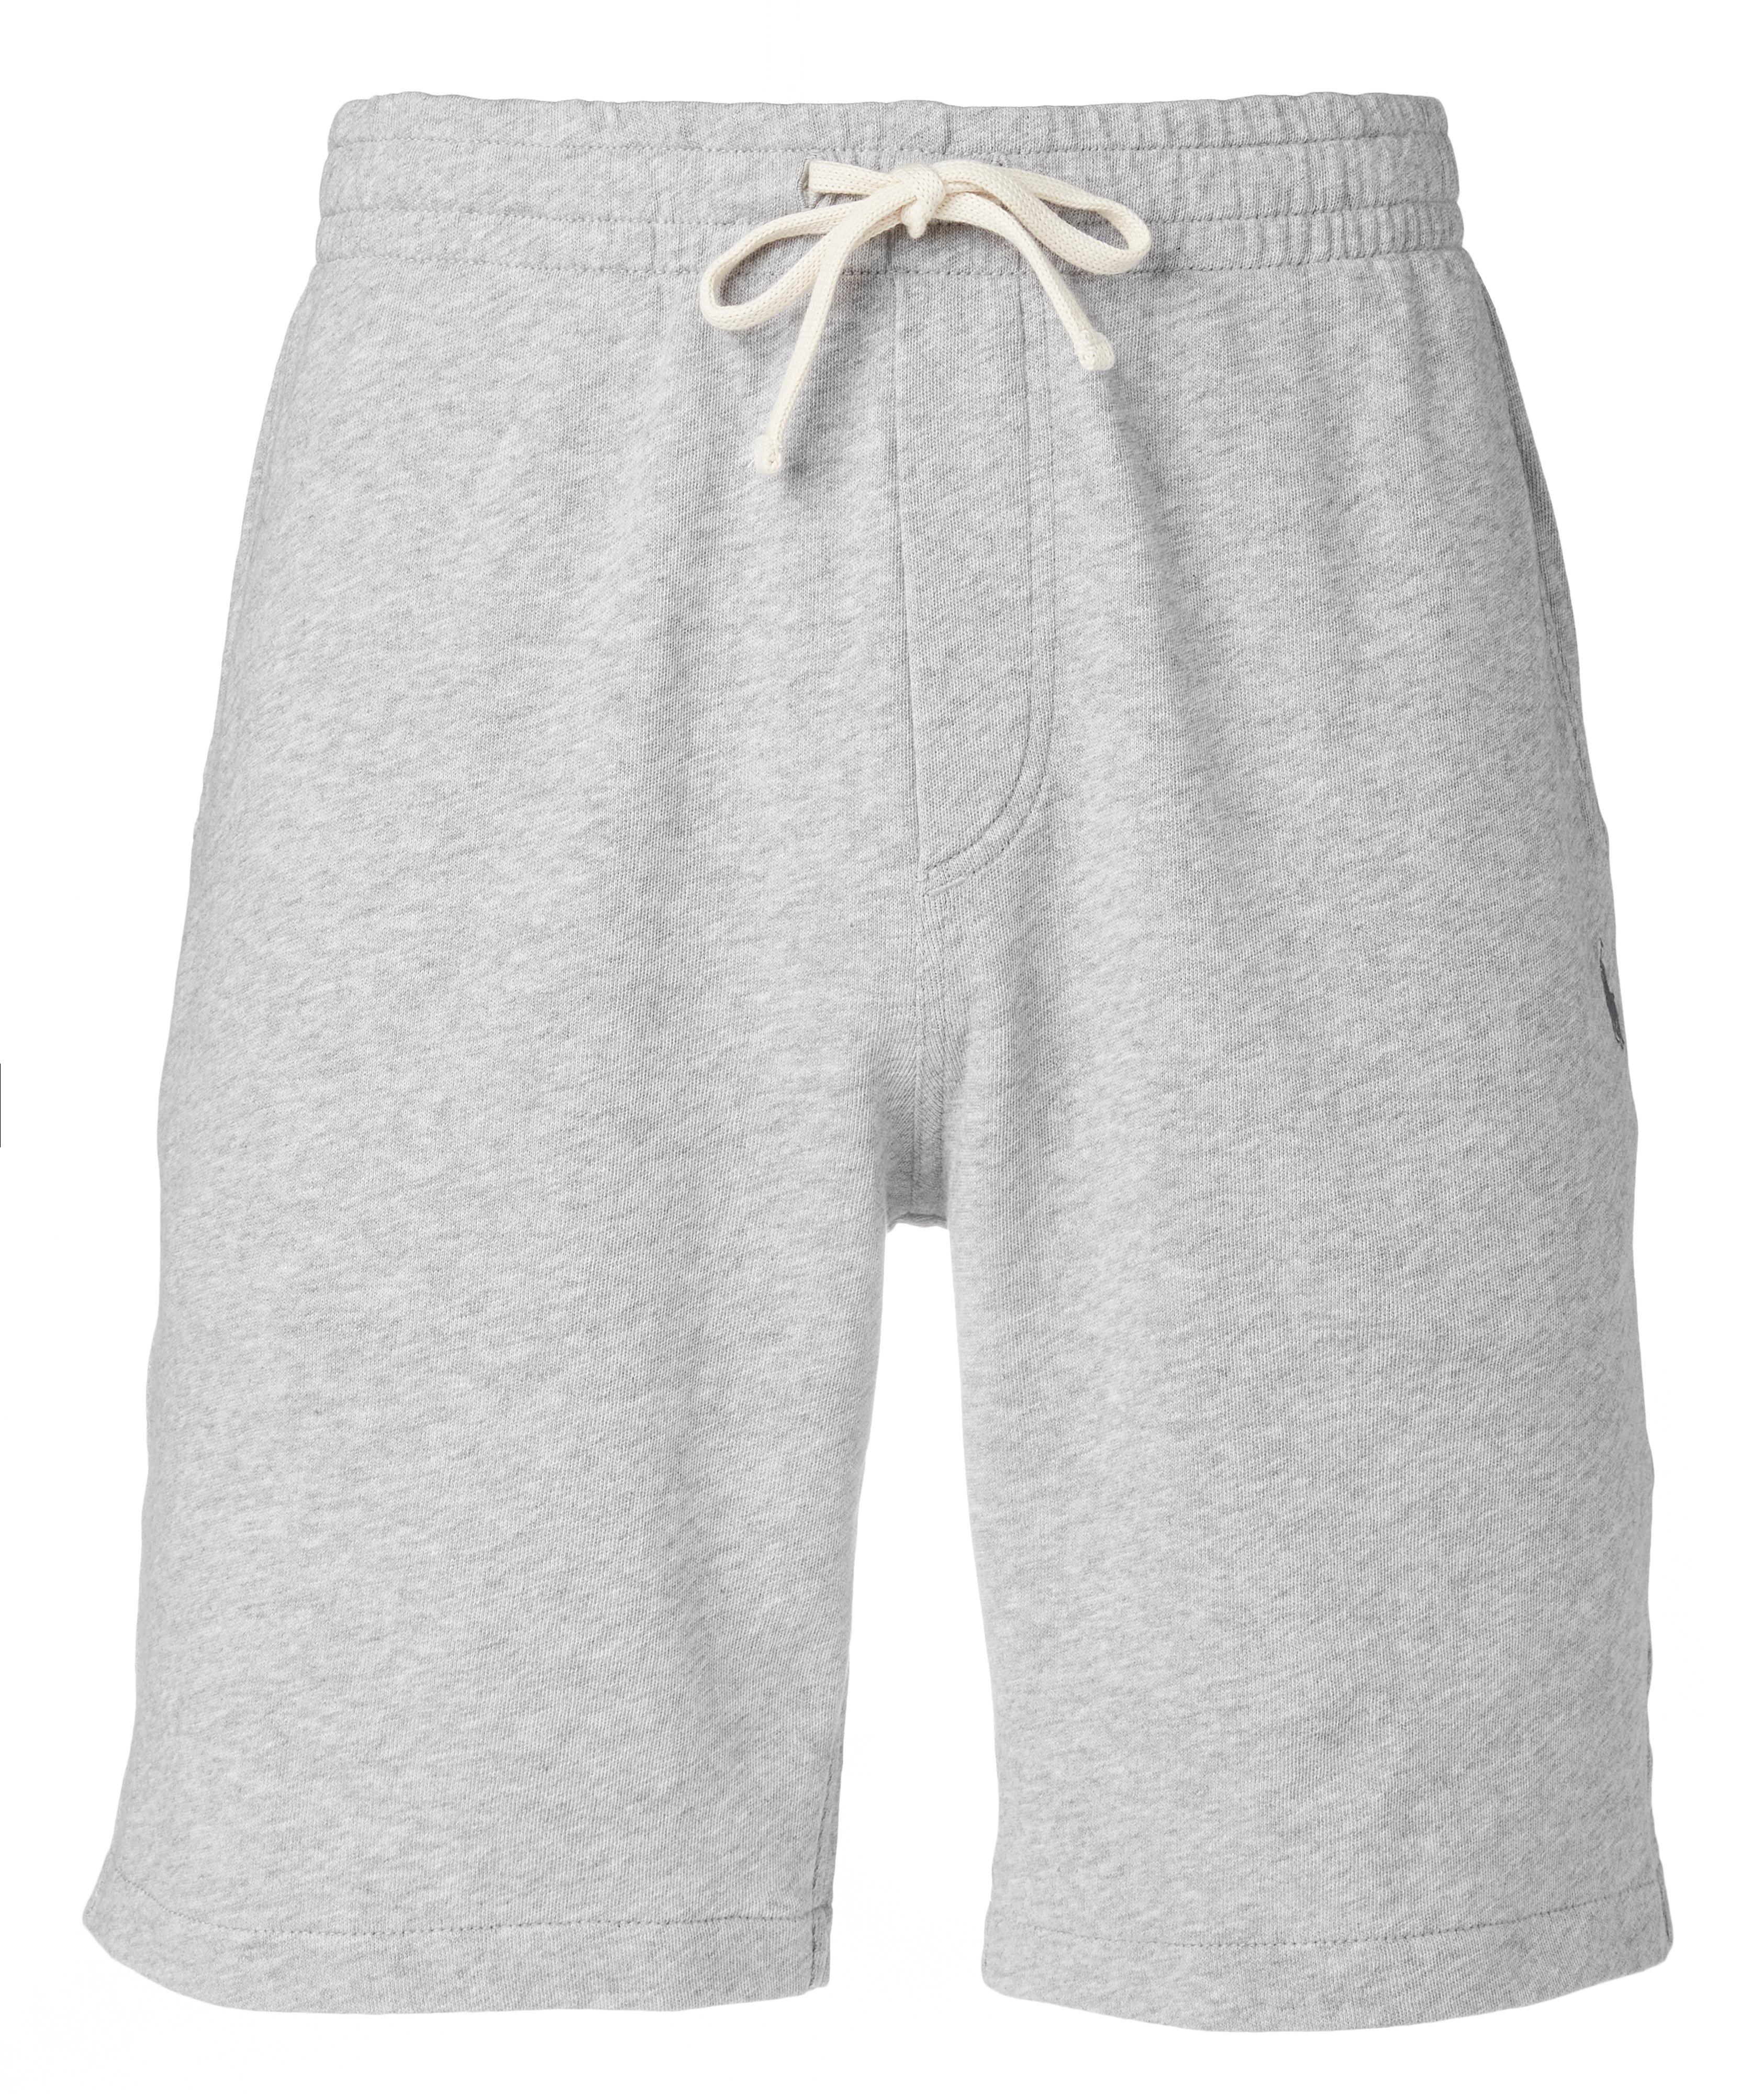 Cotton Terry Shorts image 0